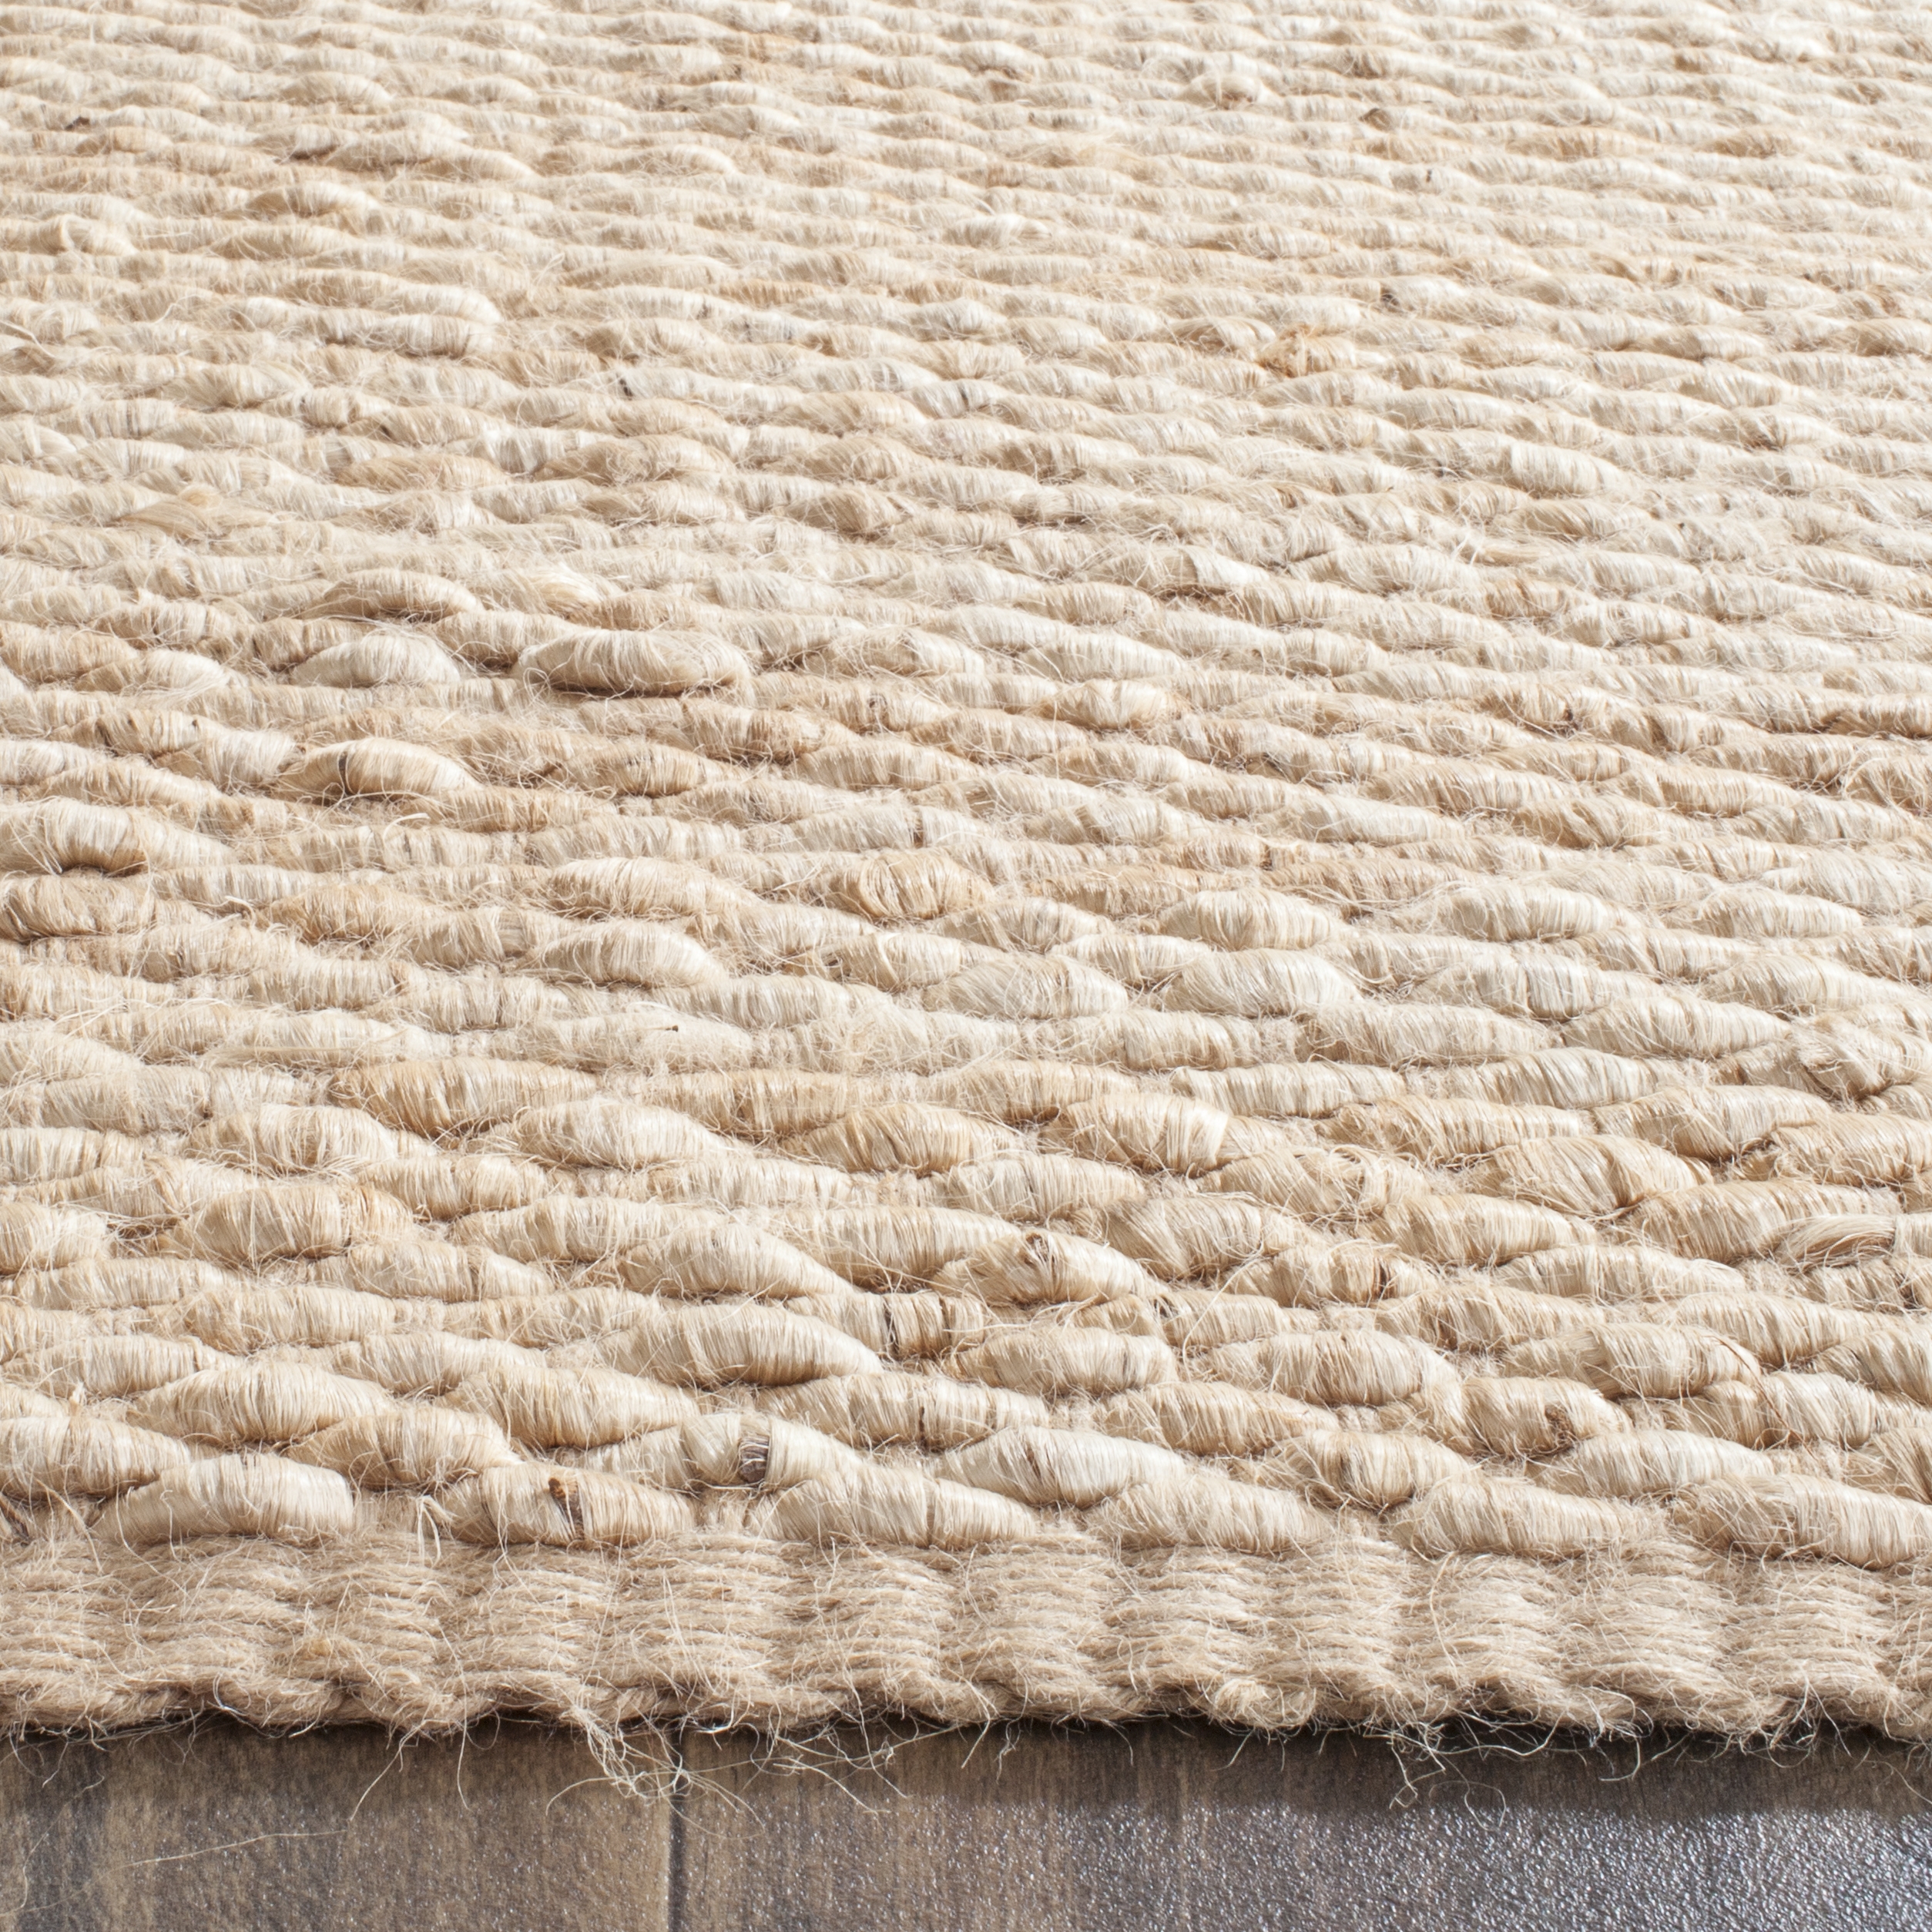 Arlo Home Hand Woven Area Rug, NF459A, Natural,  2' X 3' - Image 1